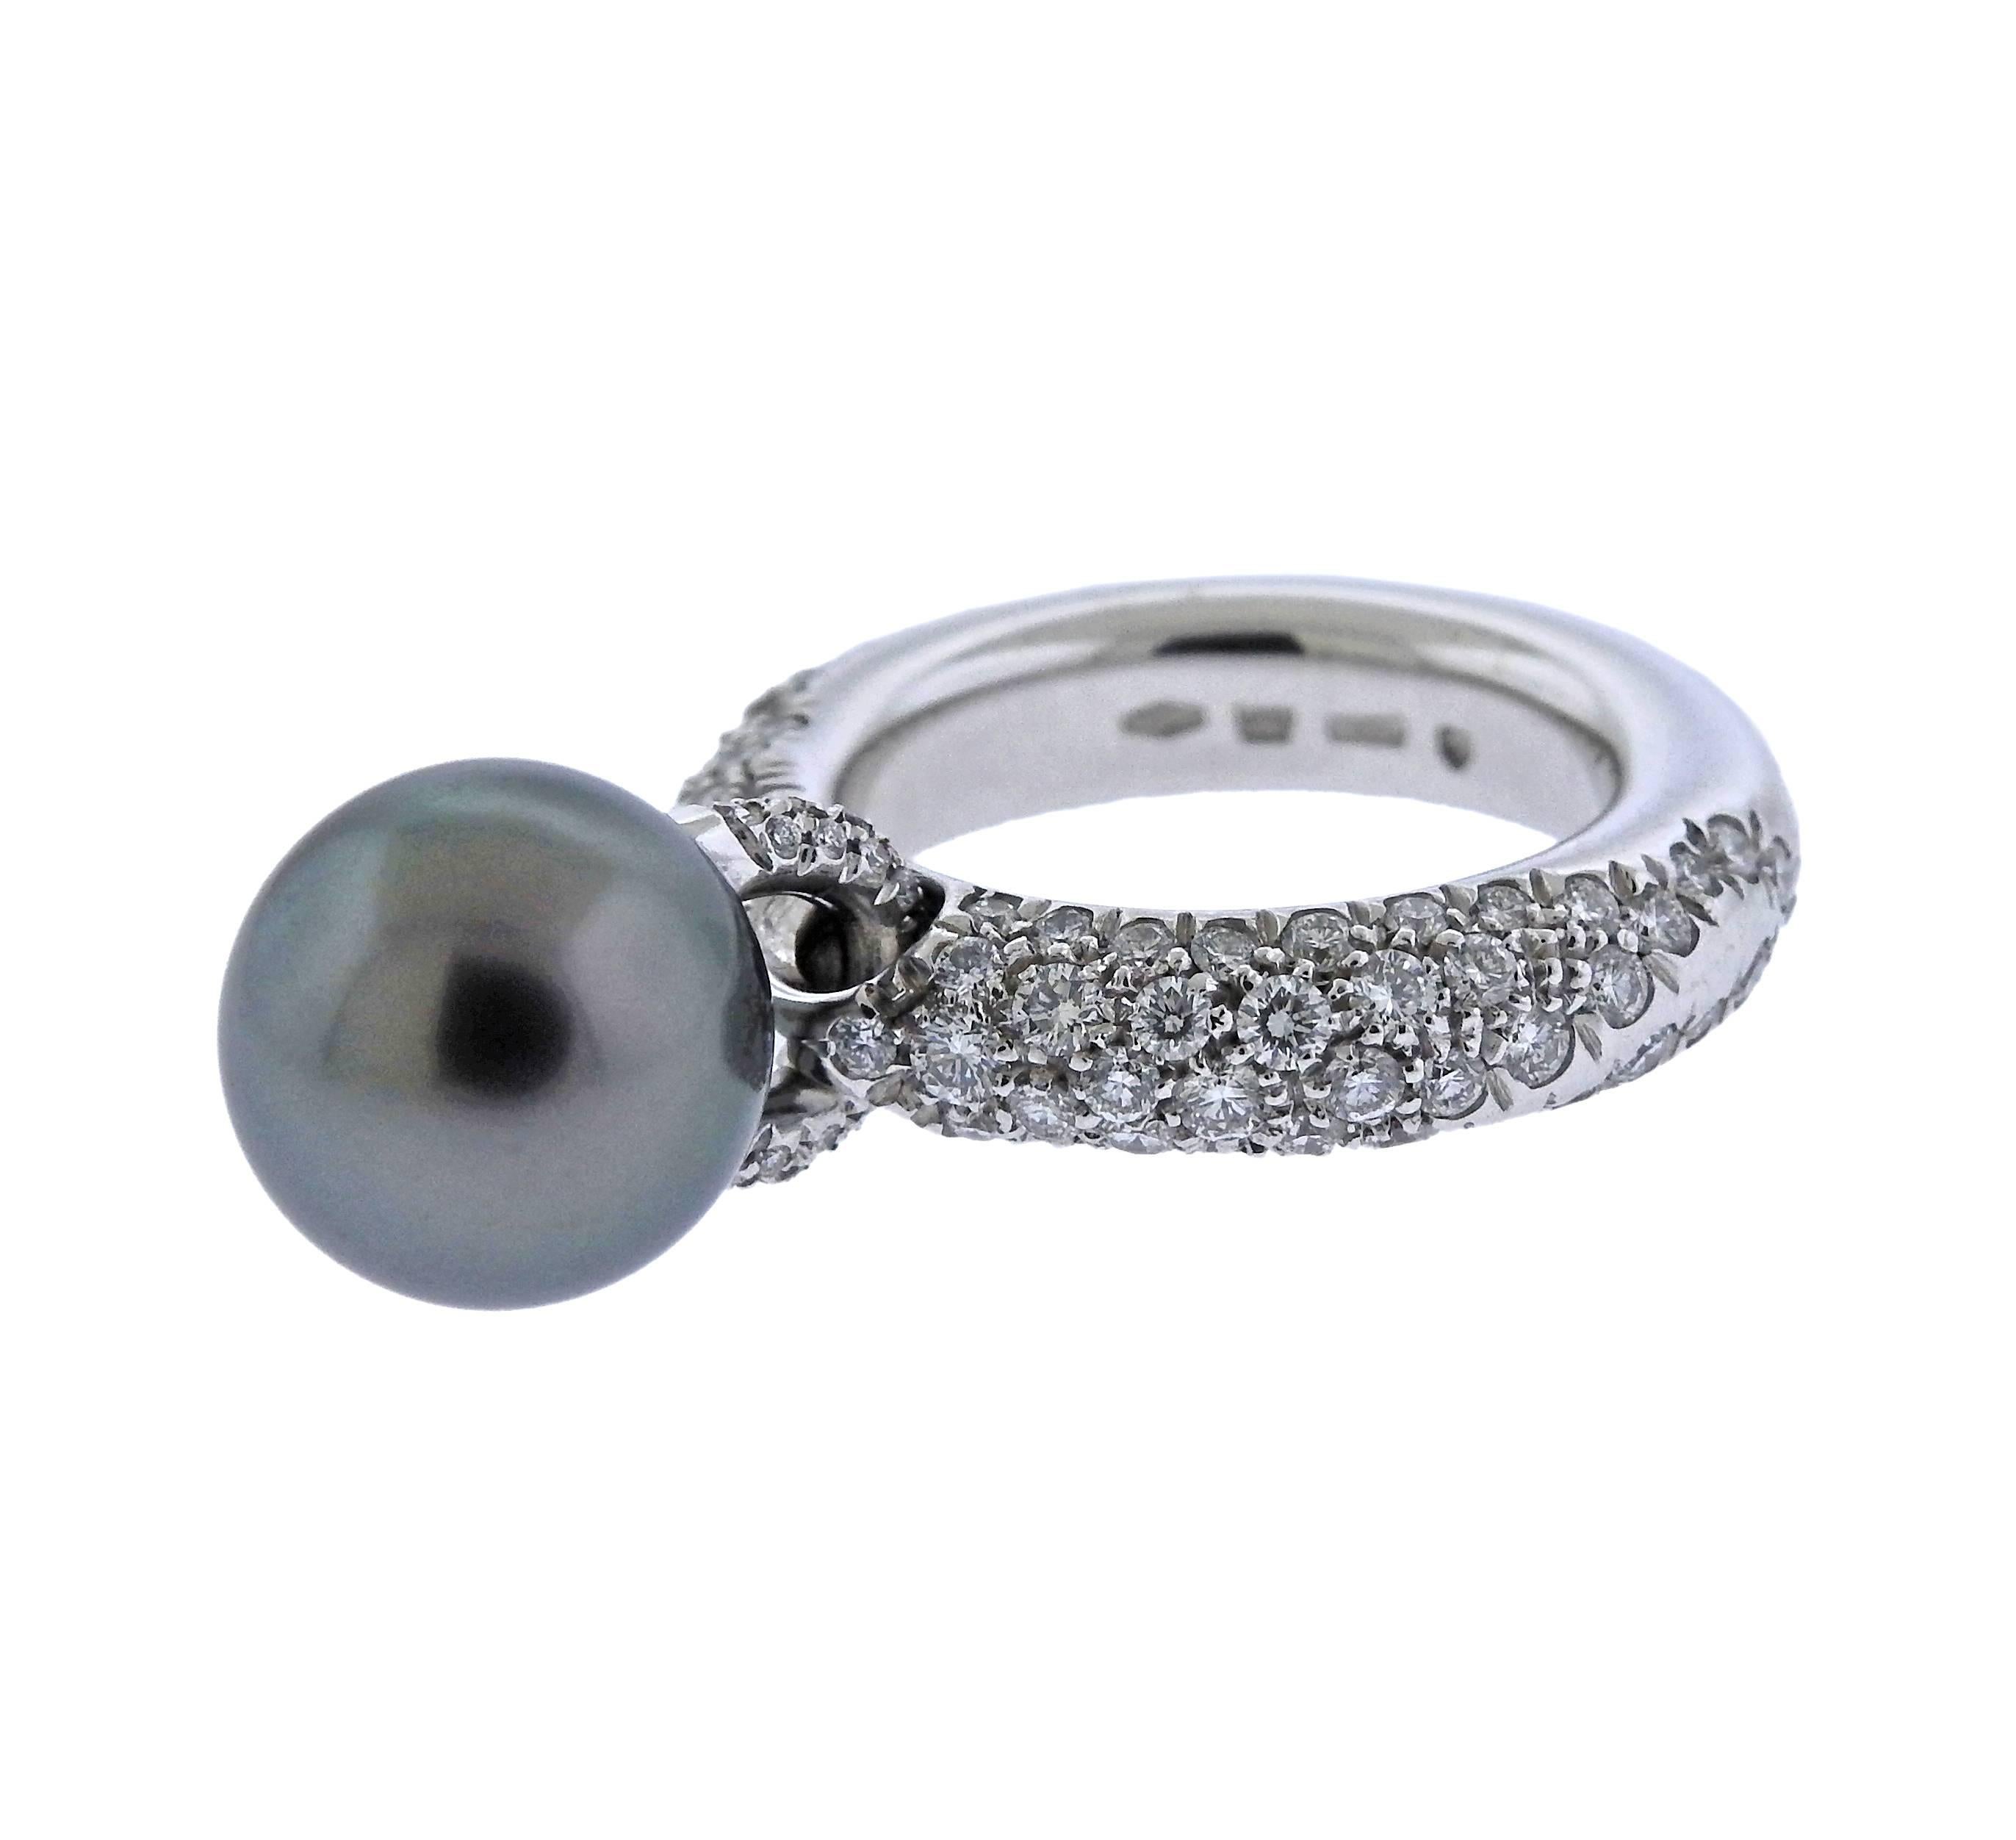 18k white gold ring, crafted by Mikimoto, featuring approx. 170ctw in diamonds and an 11.6mm Tahitian pearl charm. Ring size 6 1/2, shank is 5.1mm wide, weighs 18.7 grams. Marked: 750, made in Italy, 2294AI, M hallmark. 